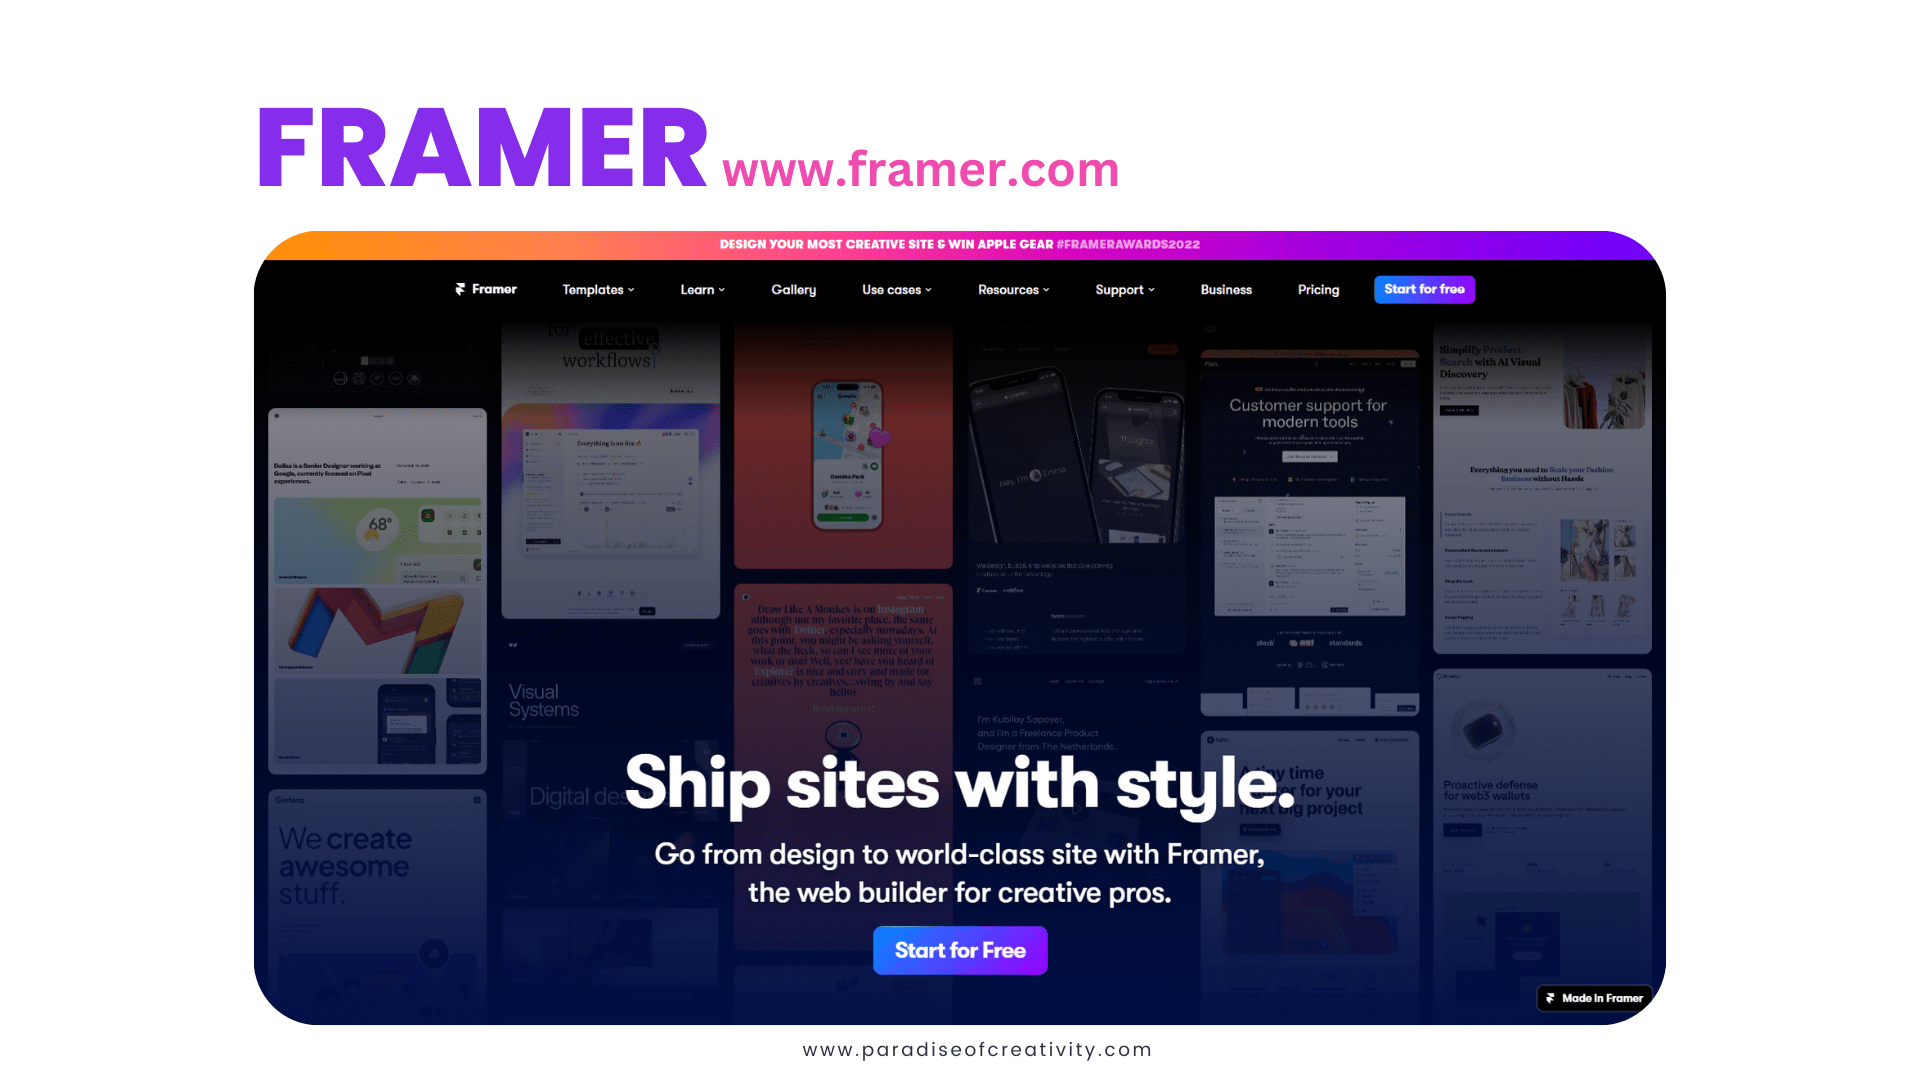 With Framer’s canvas, you can easily create stunning web pages that are interactive and engaging for your audience. The intuitive drag and drop interface makes it easy to add elements like text, links, images, and videos to your web page, and you can customize the design with a wide range of animations and effects.